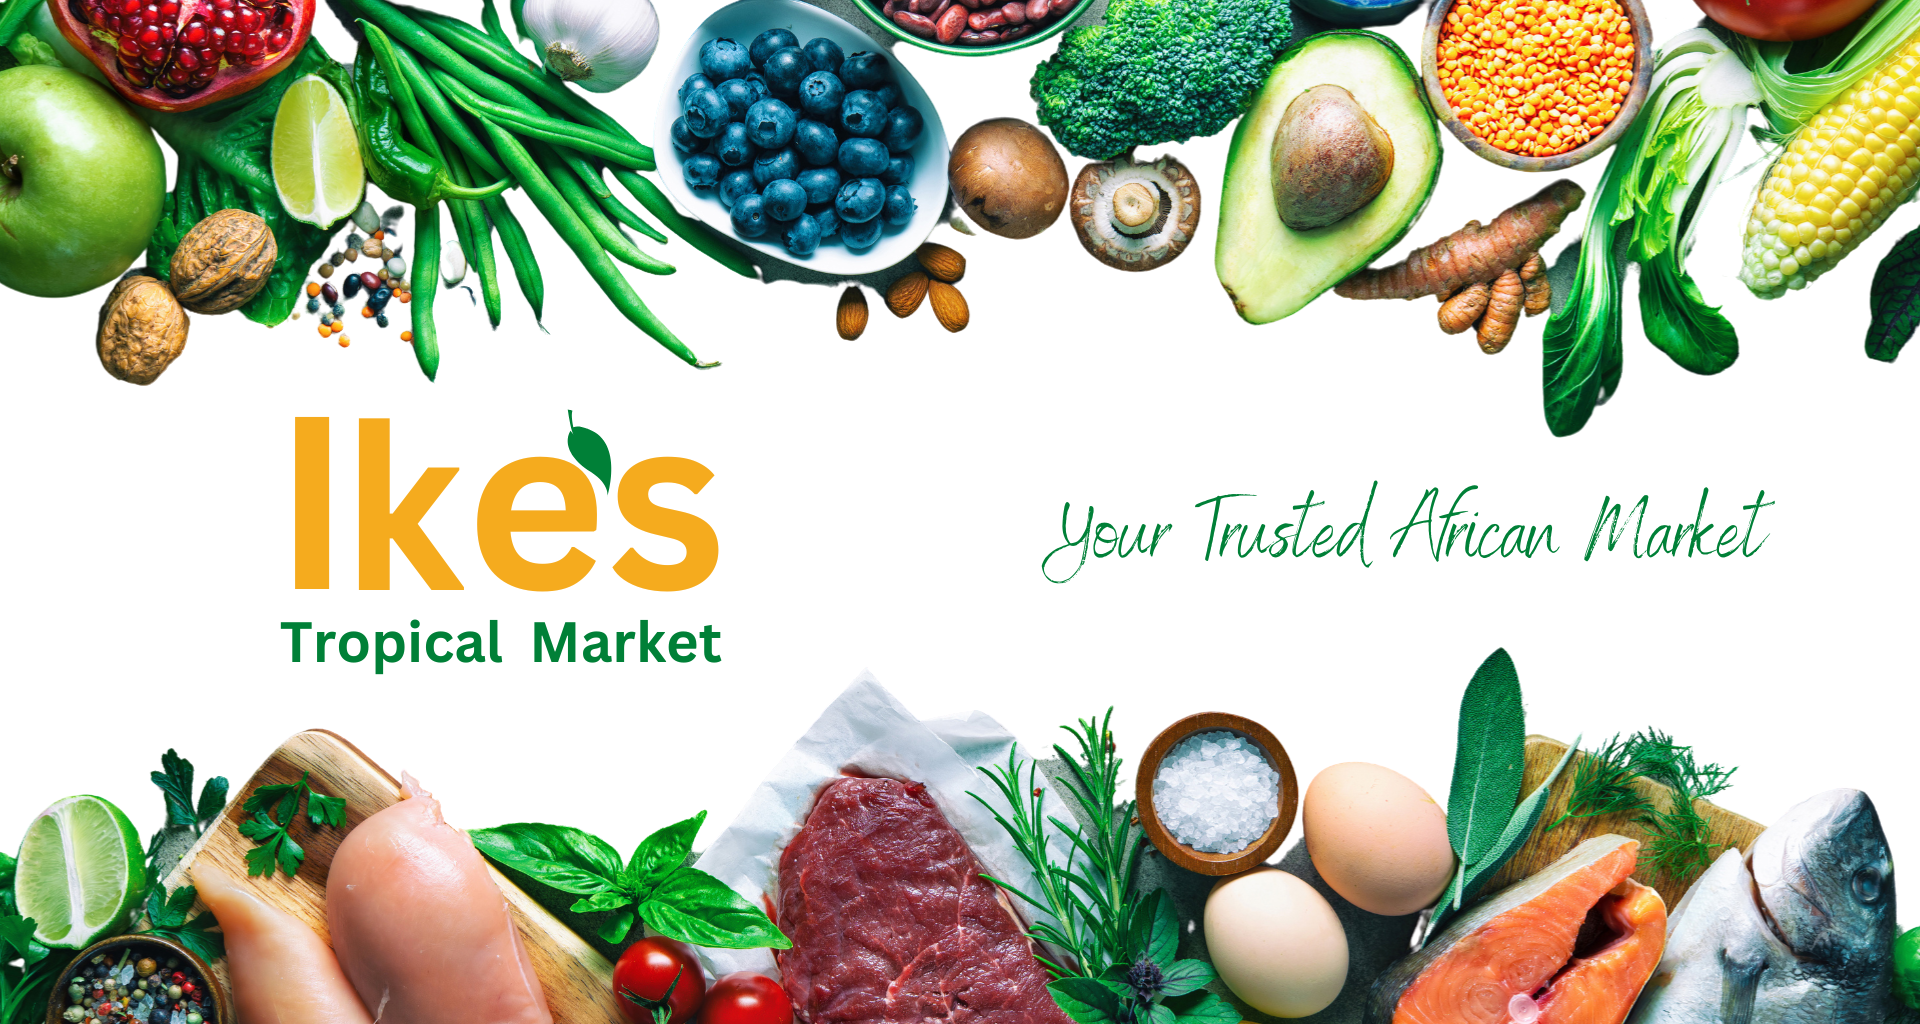 Ikes Tropical Food Market